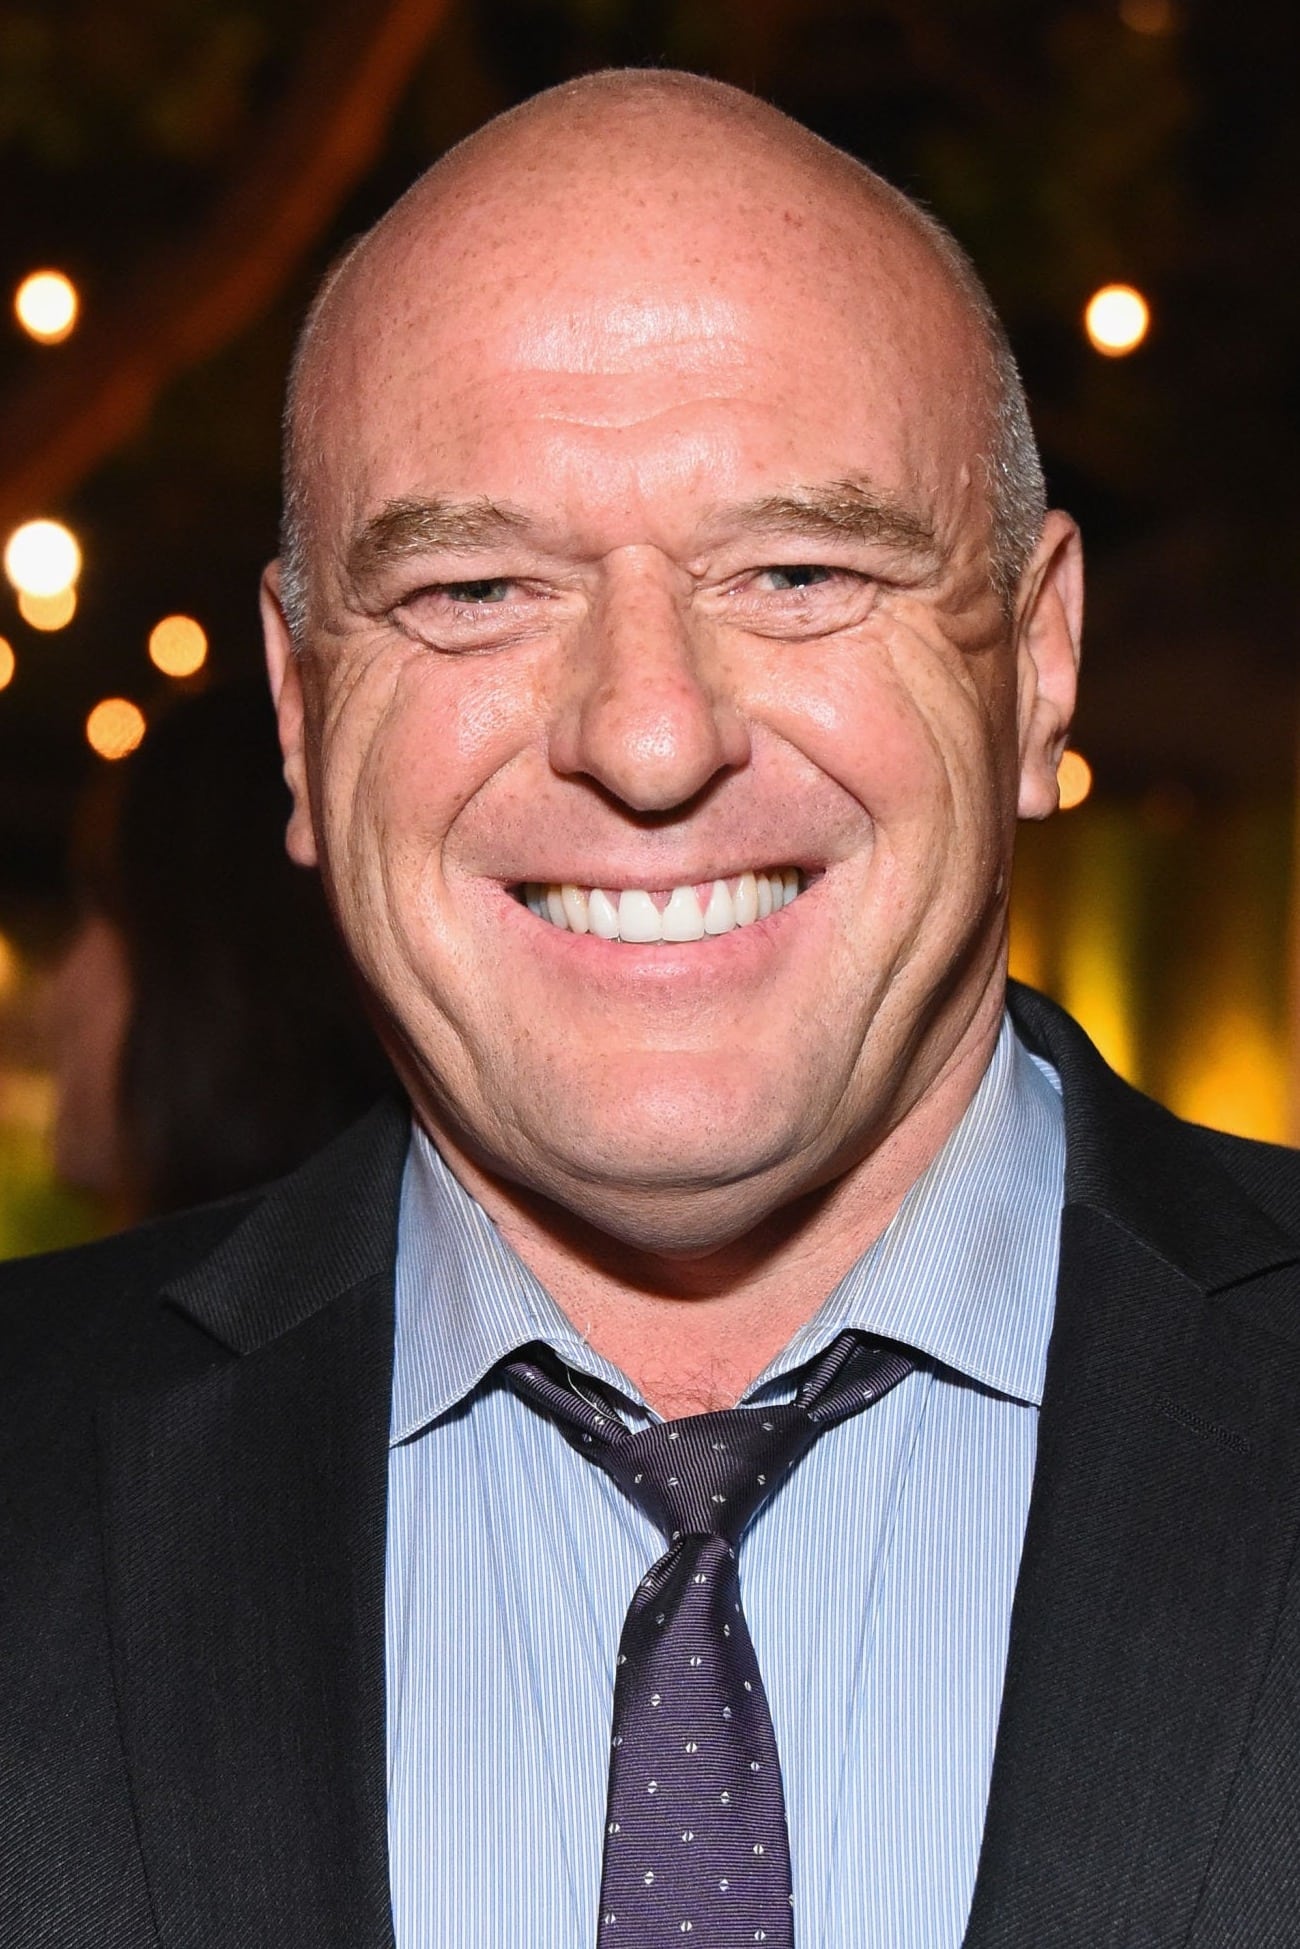 Dean Norris 60, 1963, Age, Born, Height, Children, Family, Biography